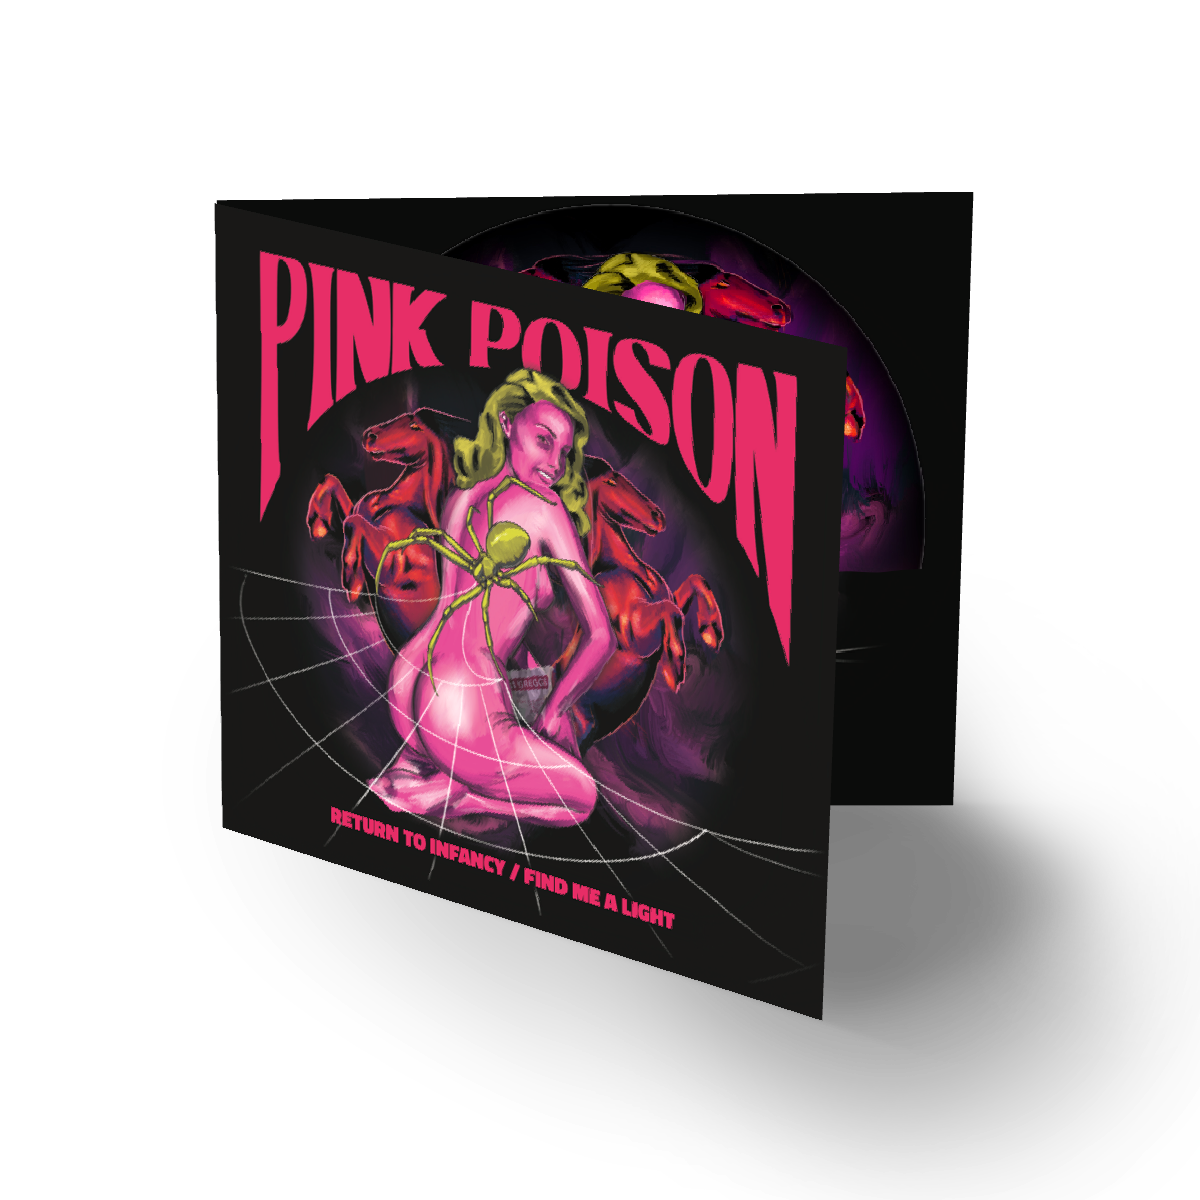 Pink Poison Double EP Limited Edition Gatefold CD